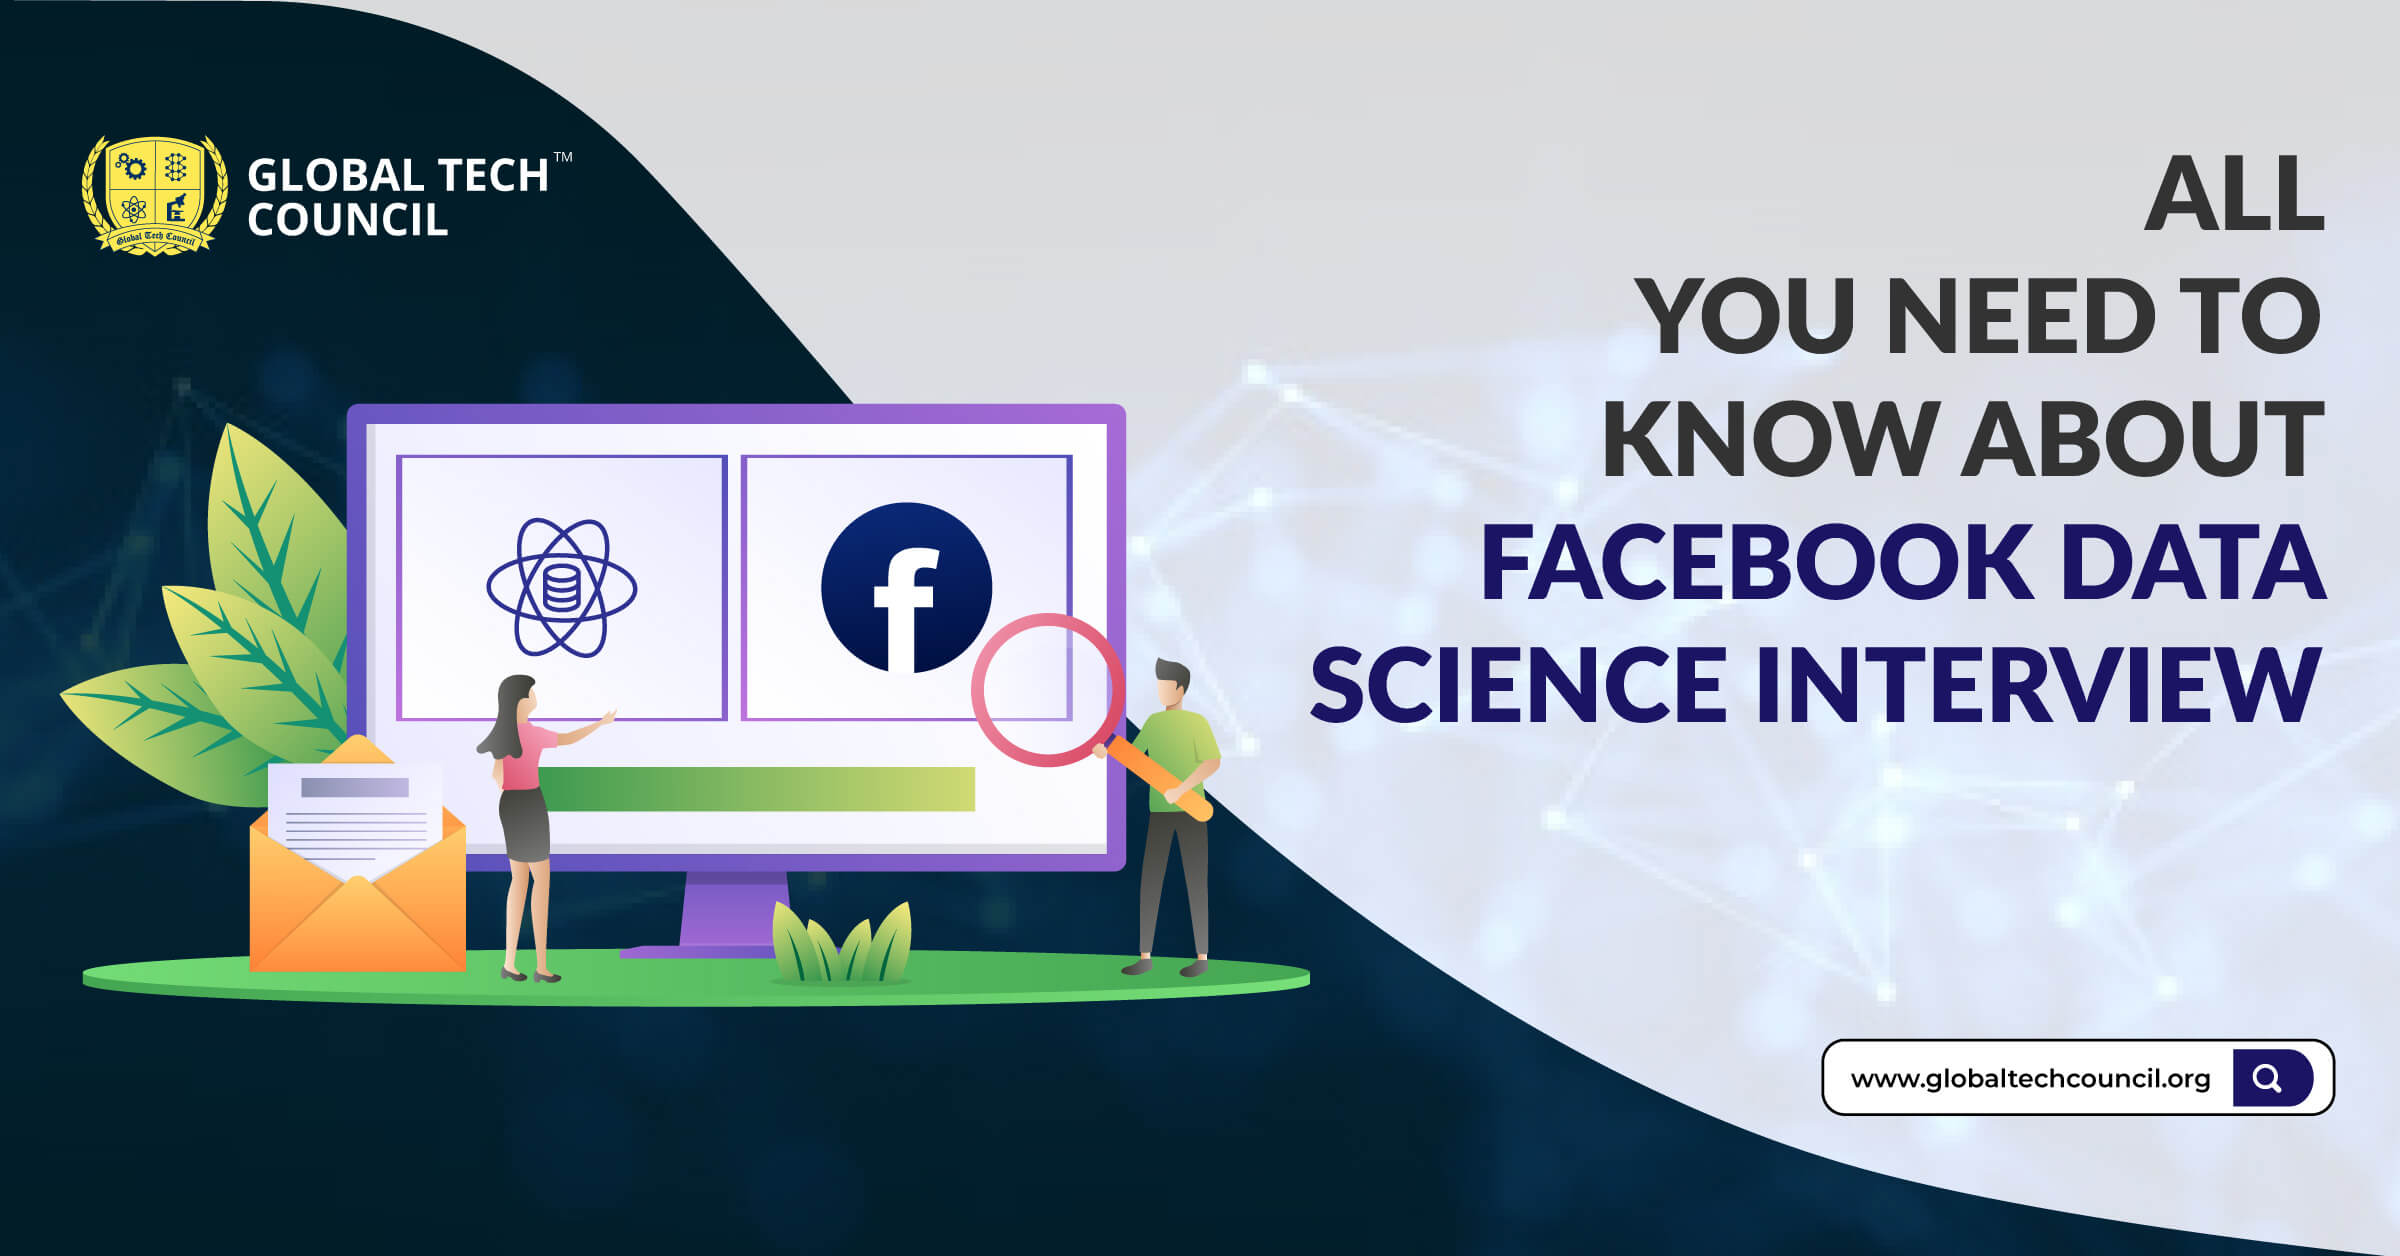 All-you-need-to-know-about-facebook-data-science-interview